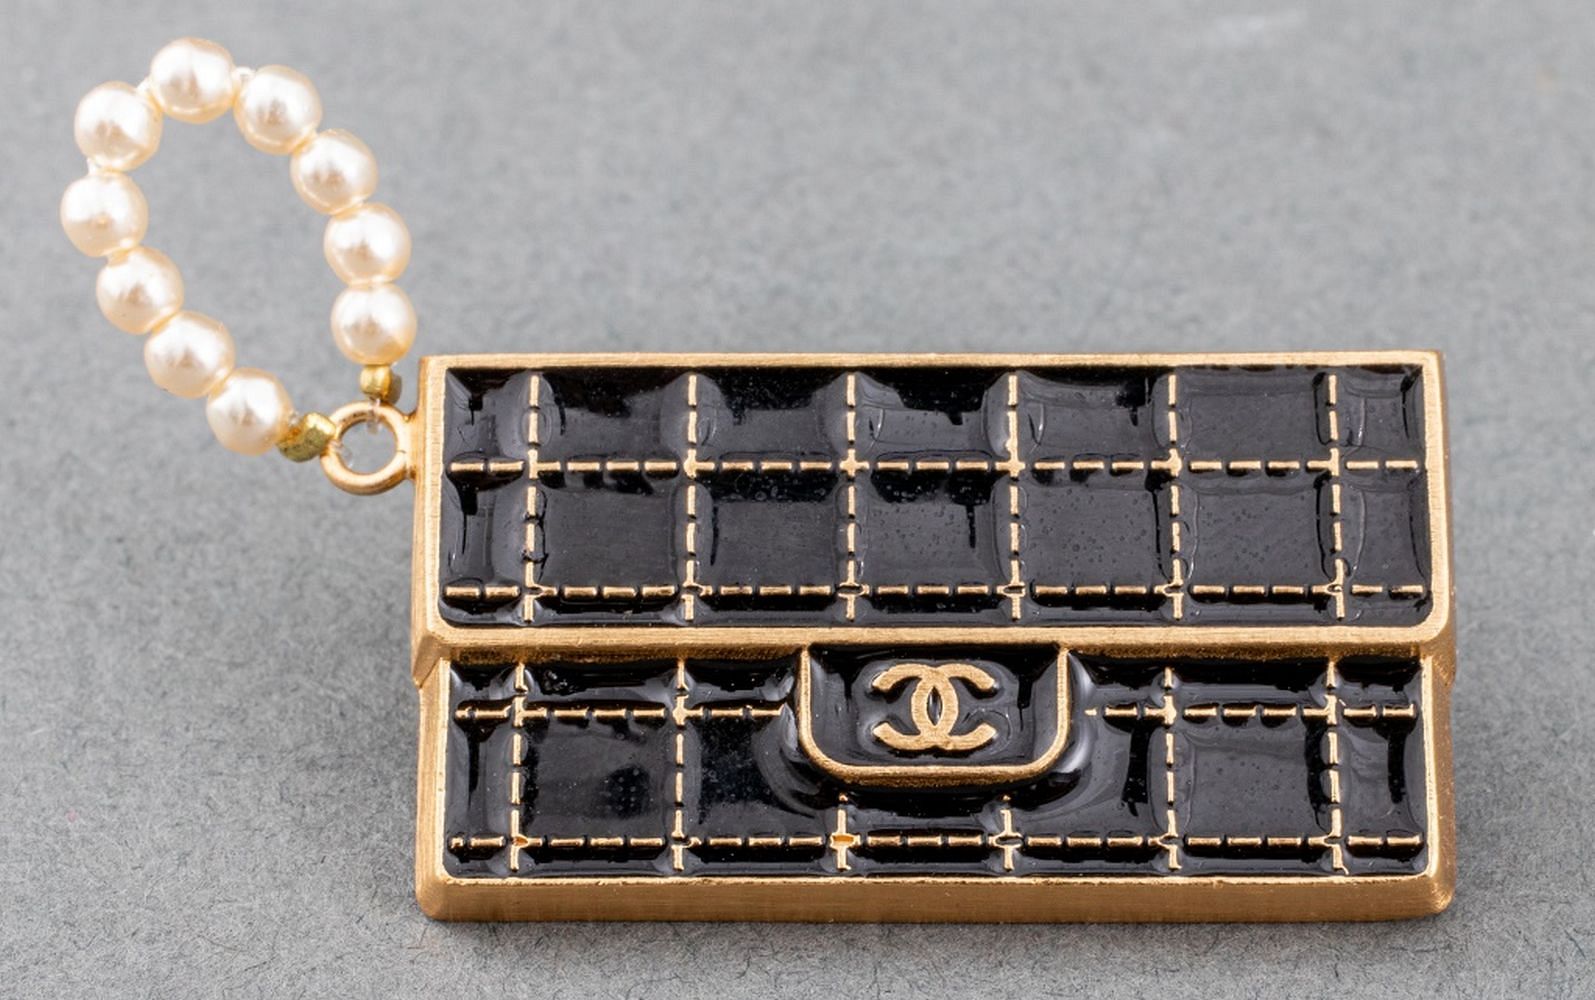 Chanel Runway Clutch Form Pin, Fall 2002 for sale at auction on 20th August